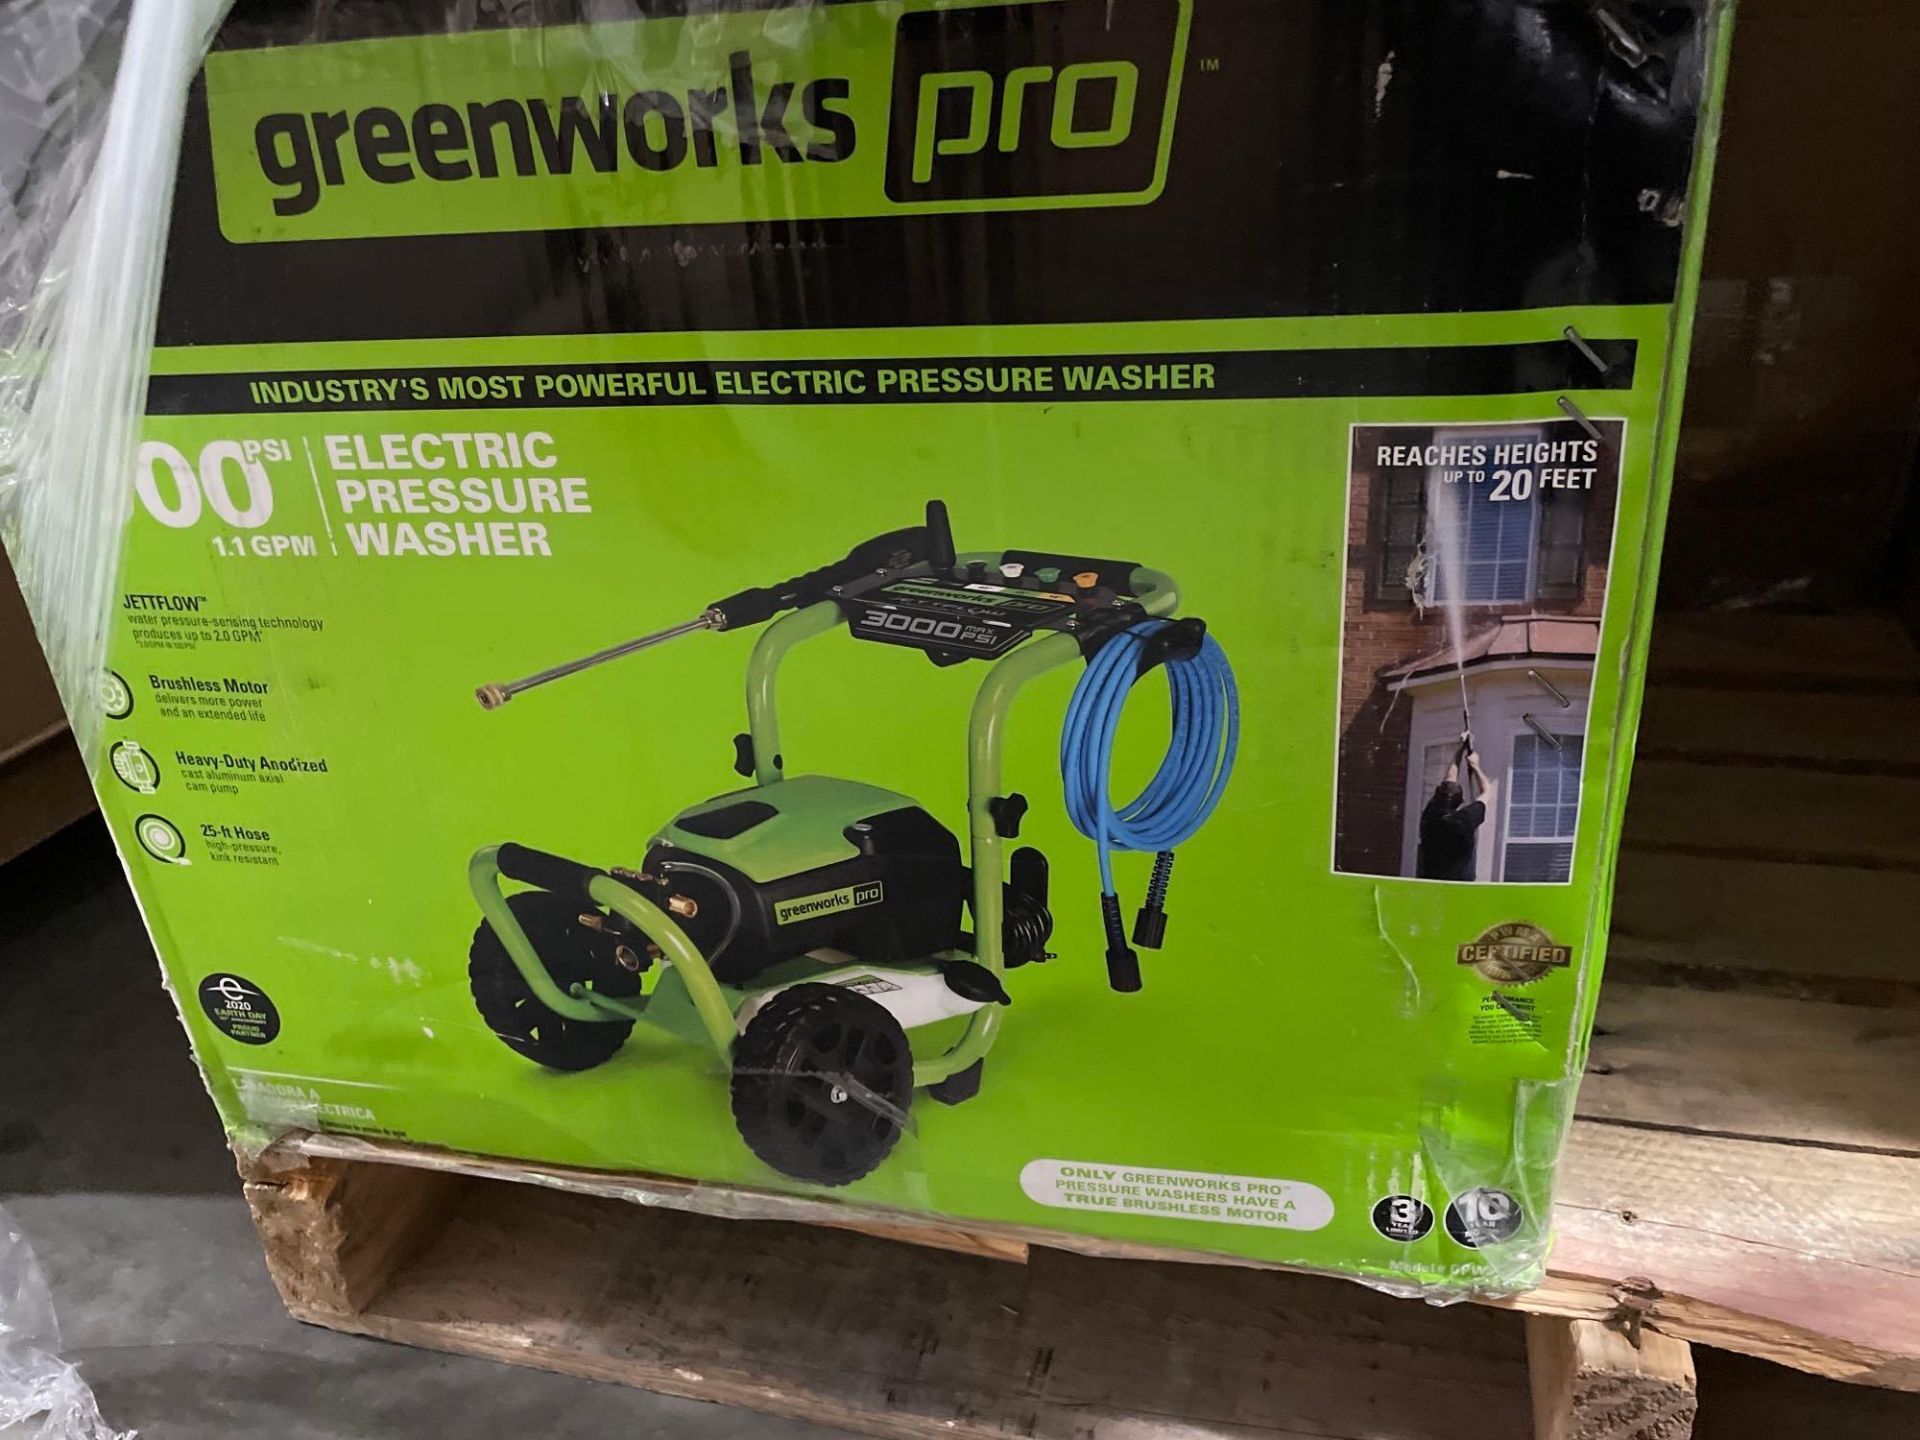 Greenworks pro electric pressure washer, and more - Image 5 of 17